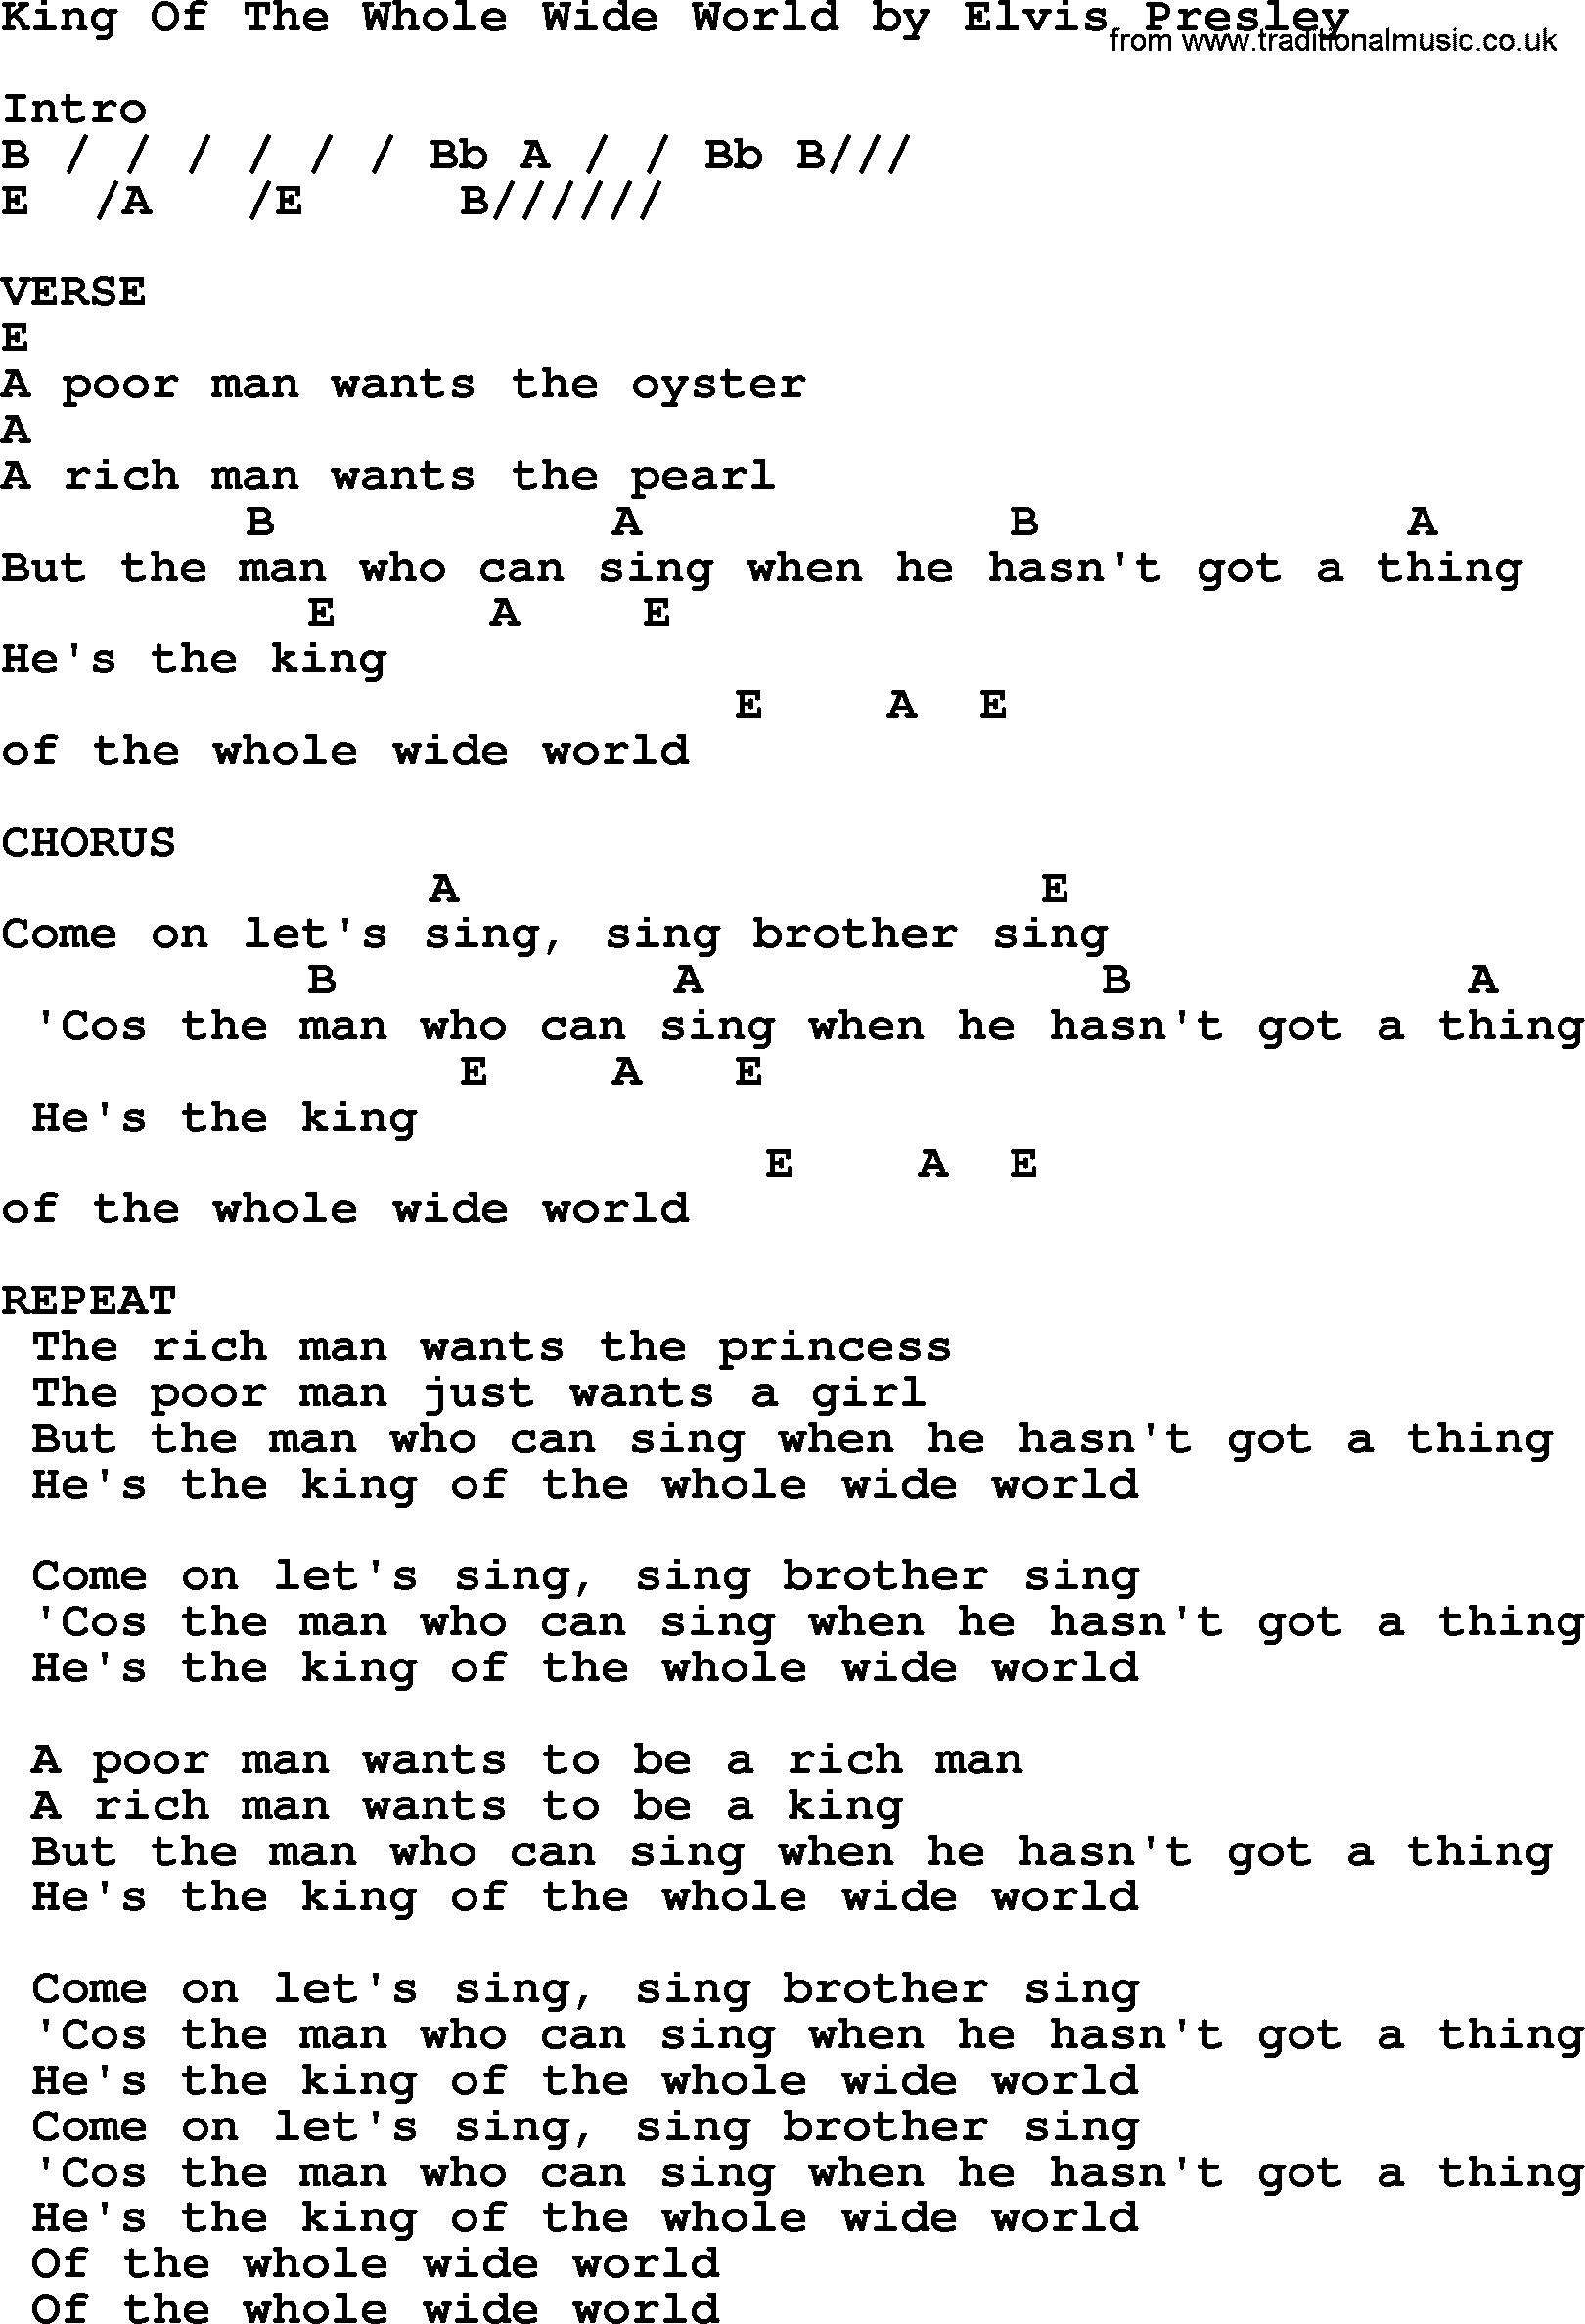 Elvis Presley song: King Of The Whole Wide World, lyrics and chords